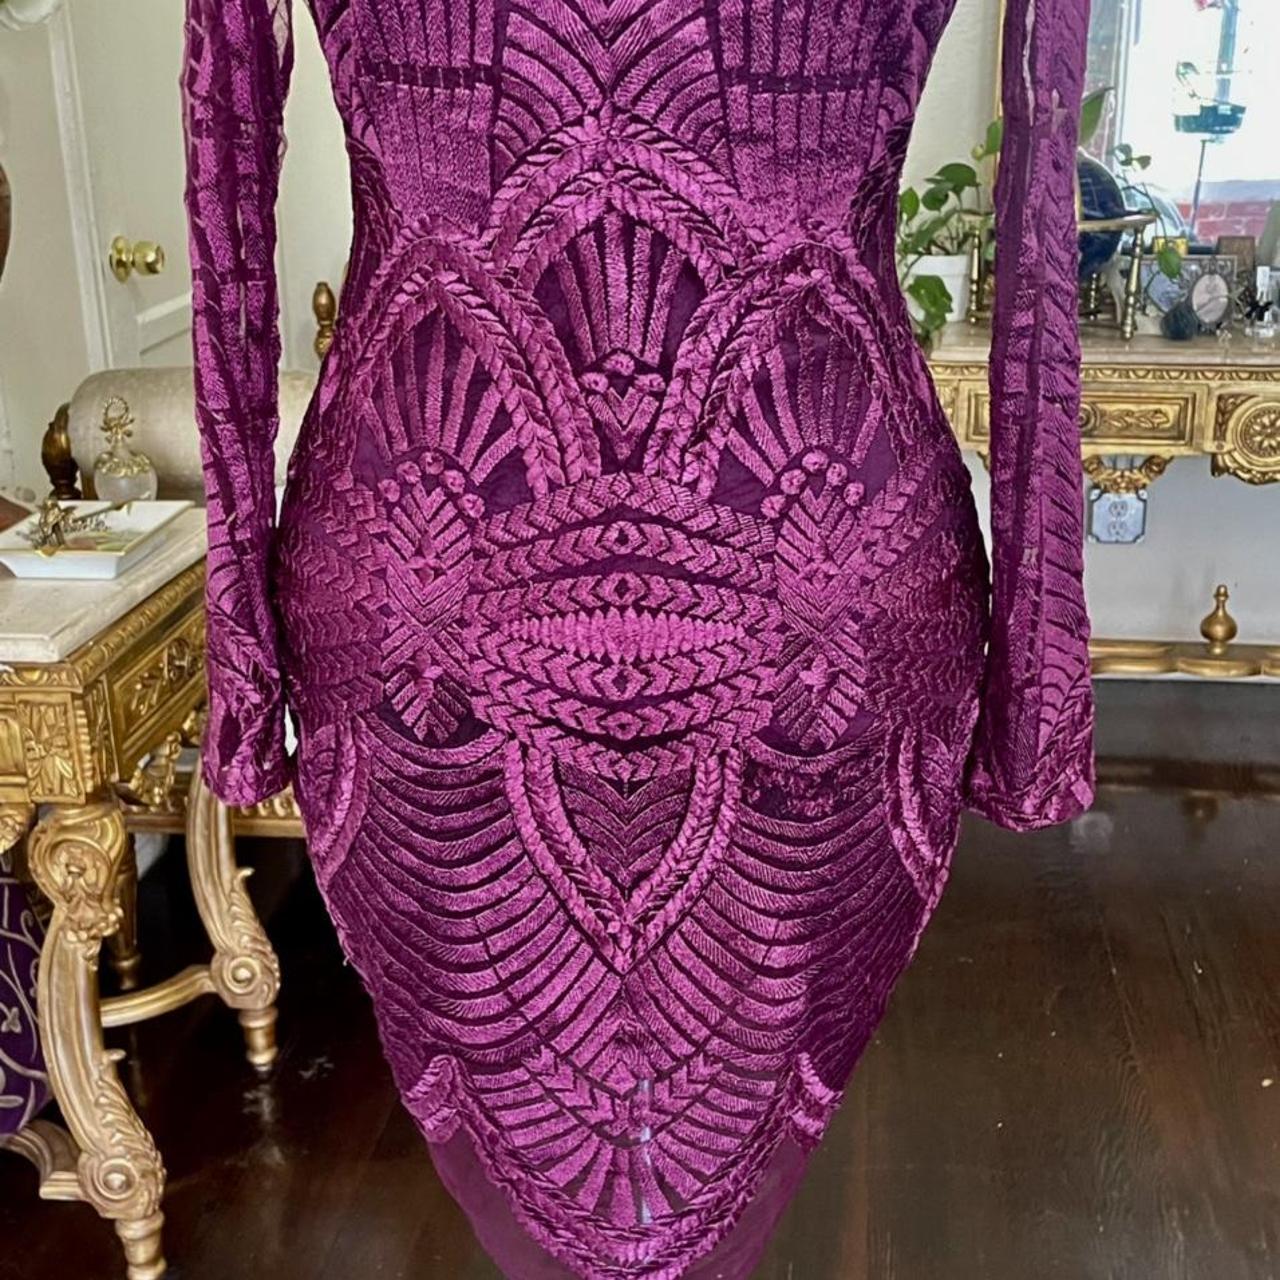 SOLD!!The Purple dress is transparent and has a... - Depop